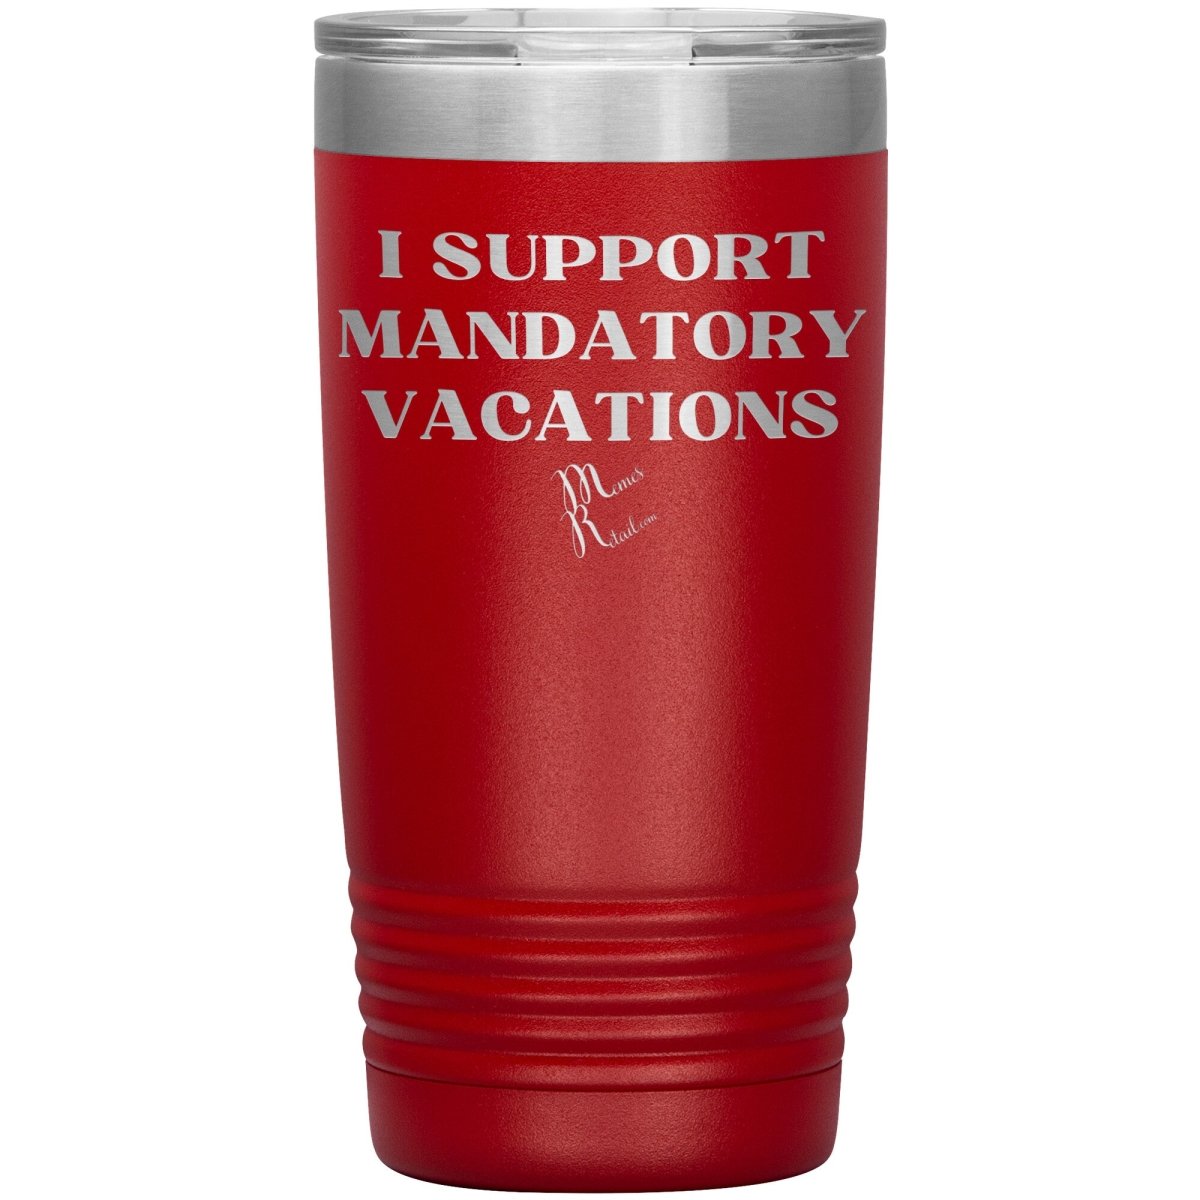 I support mandatory vacations Tumblers, 20oz Insulated Tumbler / Red - MemesRetail.com